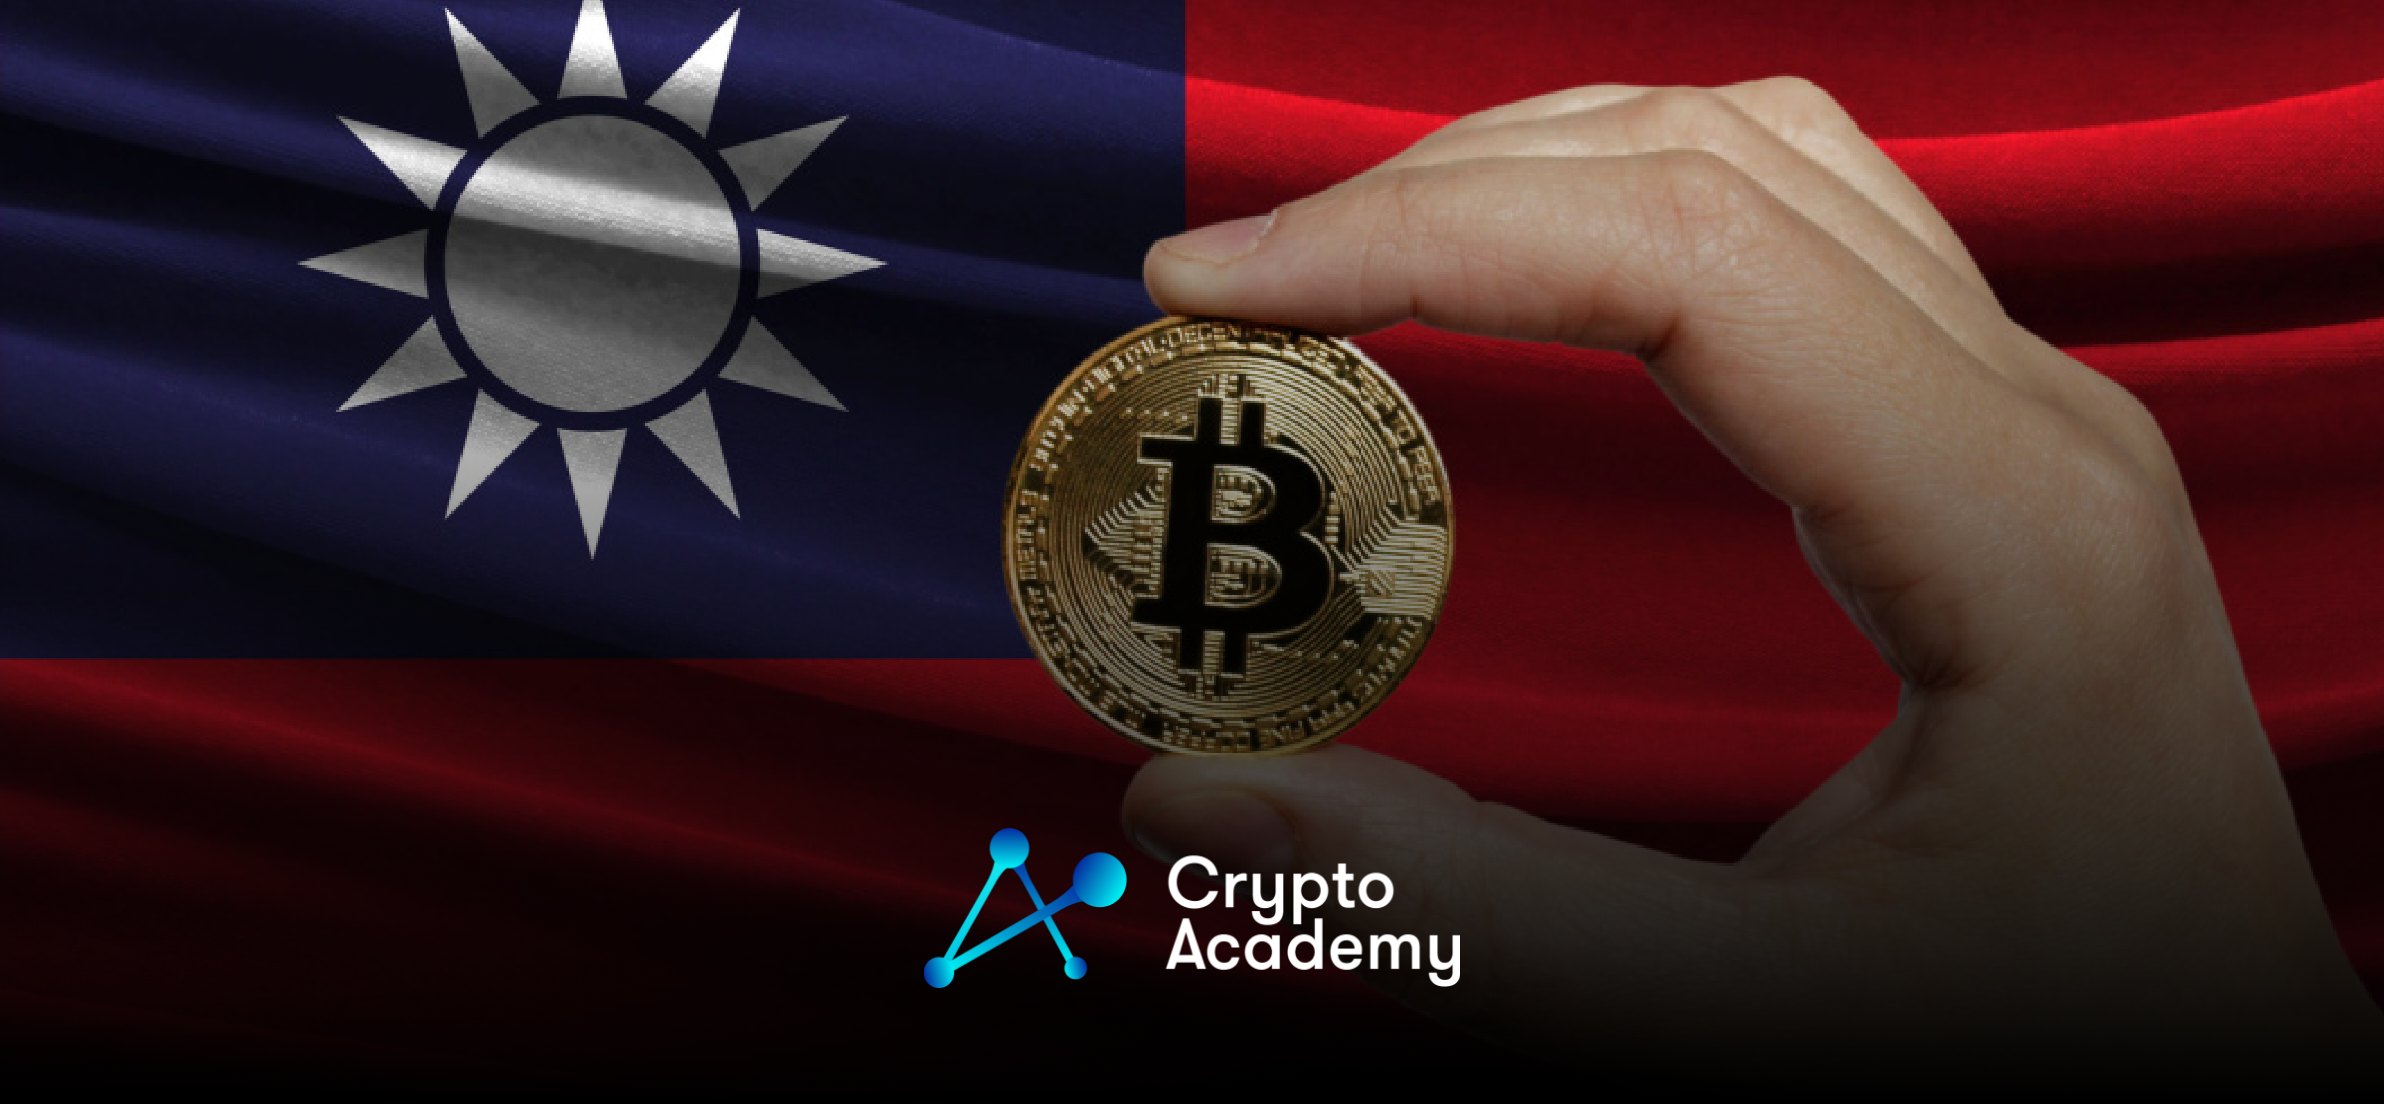 Taiwan Takes Action; Bans Unregistered Foreign Crypto Exchanges